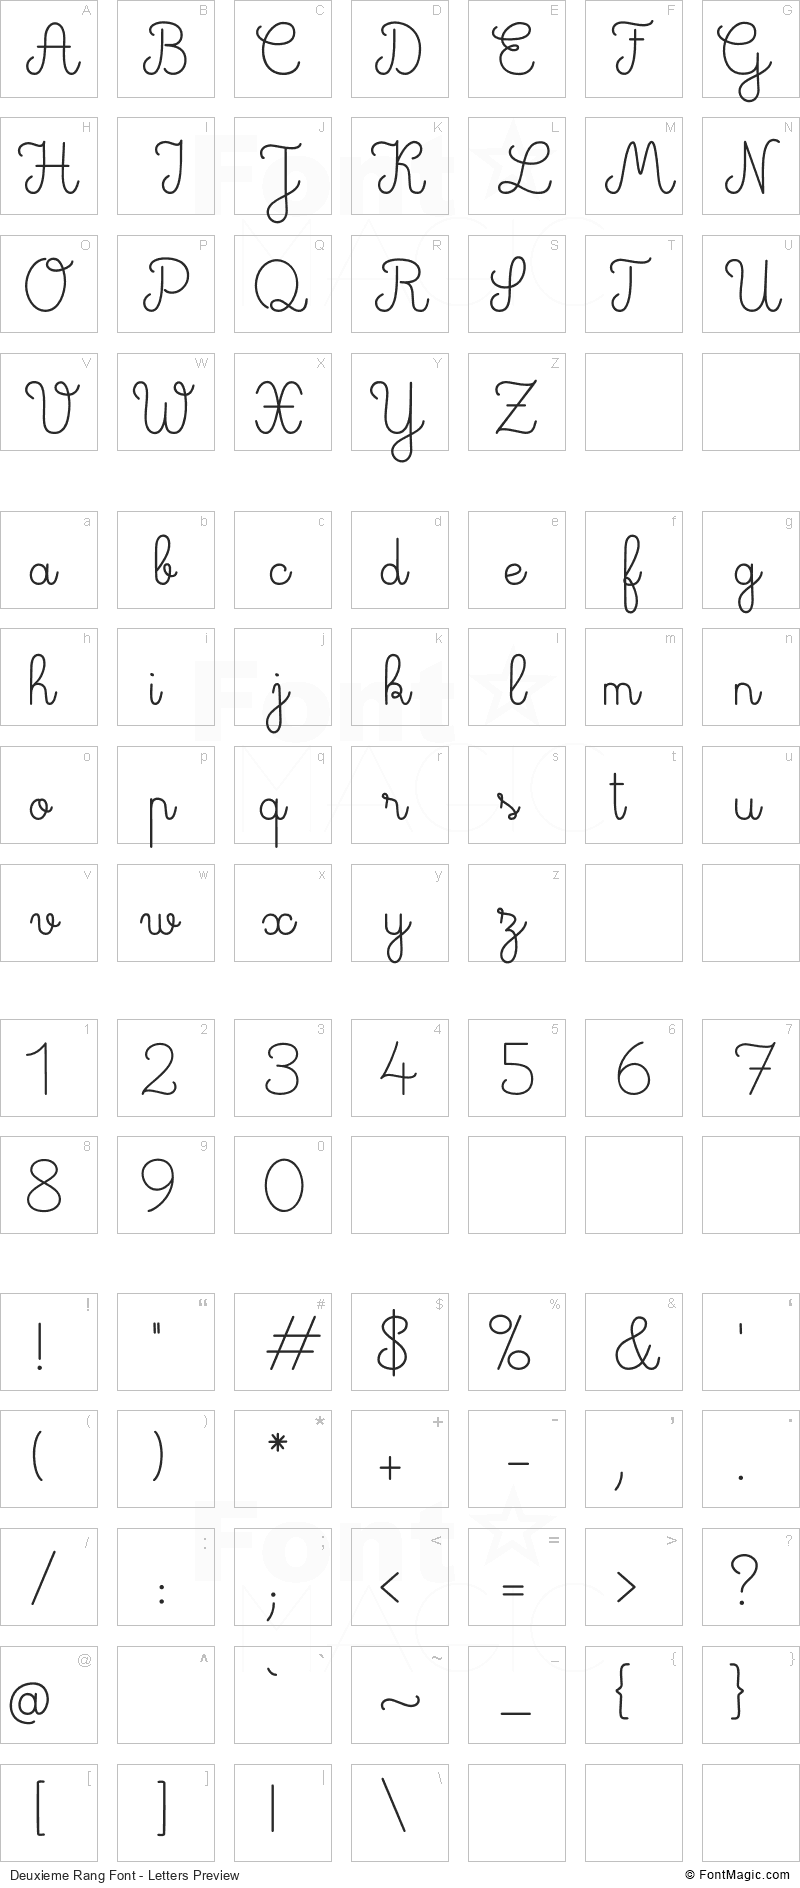 Deuxieme Rang Font - All Latters Preview Chart